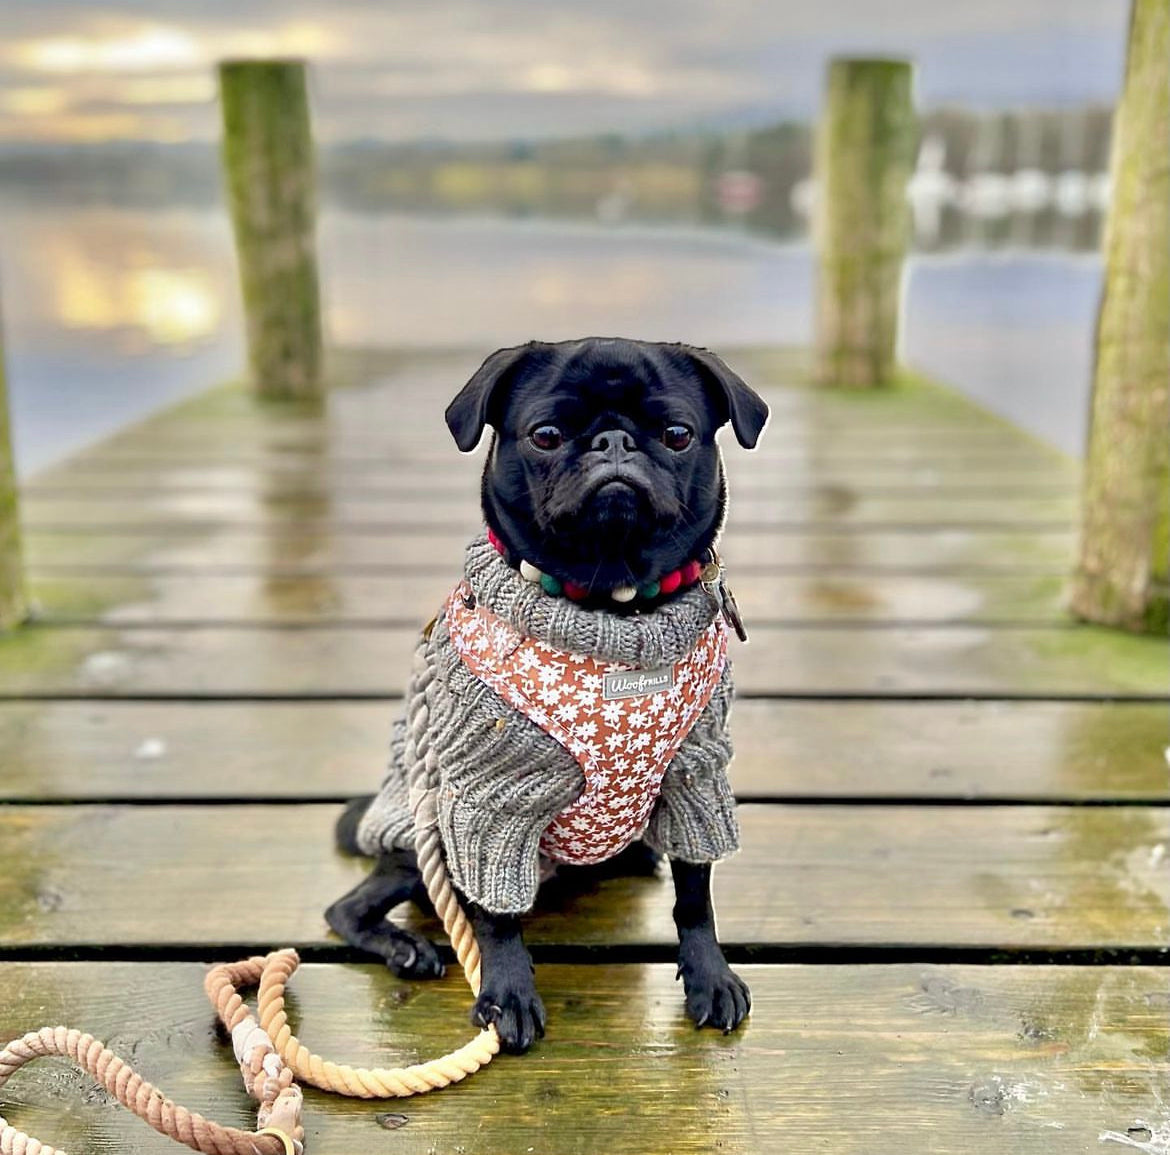 Cute pug wearing a dog harness with daisy